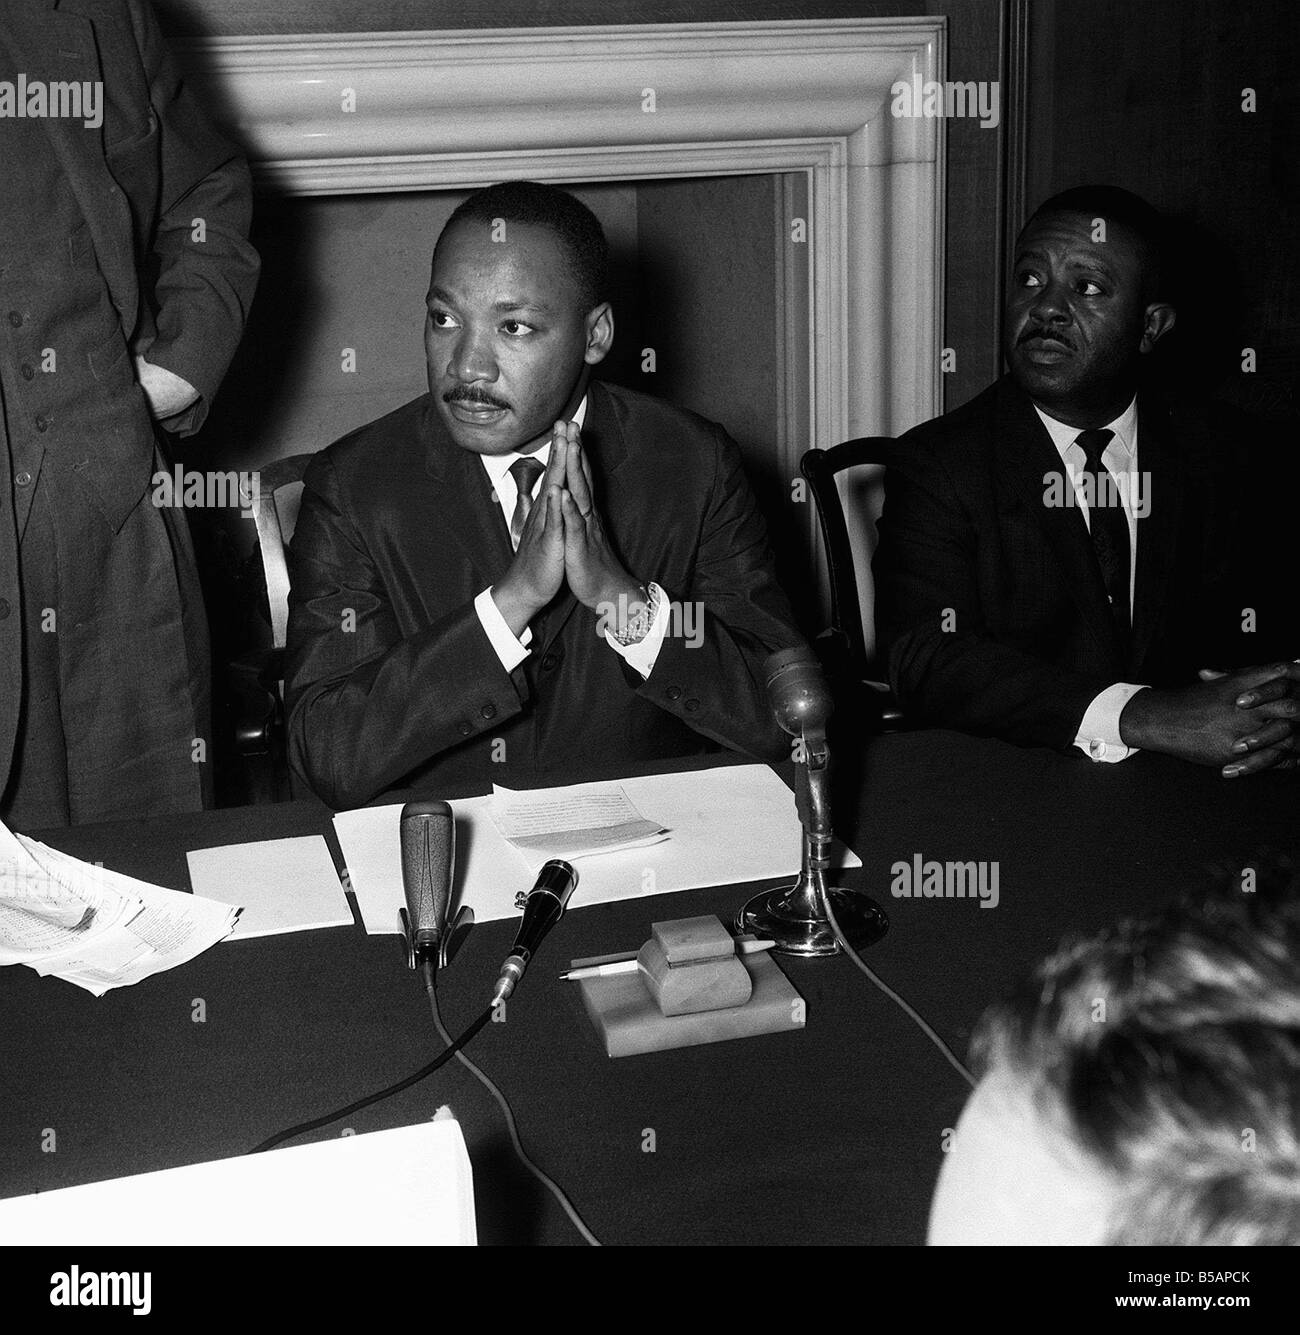 Dr Martin Luther King speaking at his press conference after sermon at St Pauls Cathed Londonr MSI LAFjan05 15th January marks the birthday of black American Civil Rights leader Martin Luther King born in Atlanta Georgia in 1929 Winner of the Nobel Peace Prize in 1964 Stock Photo